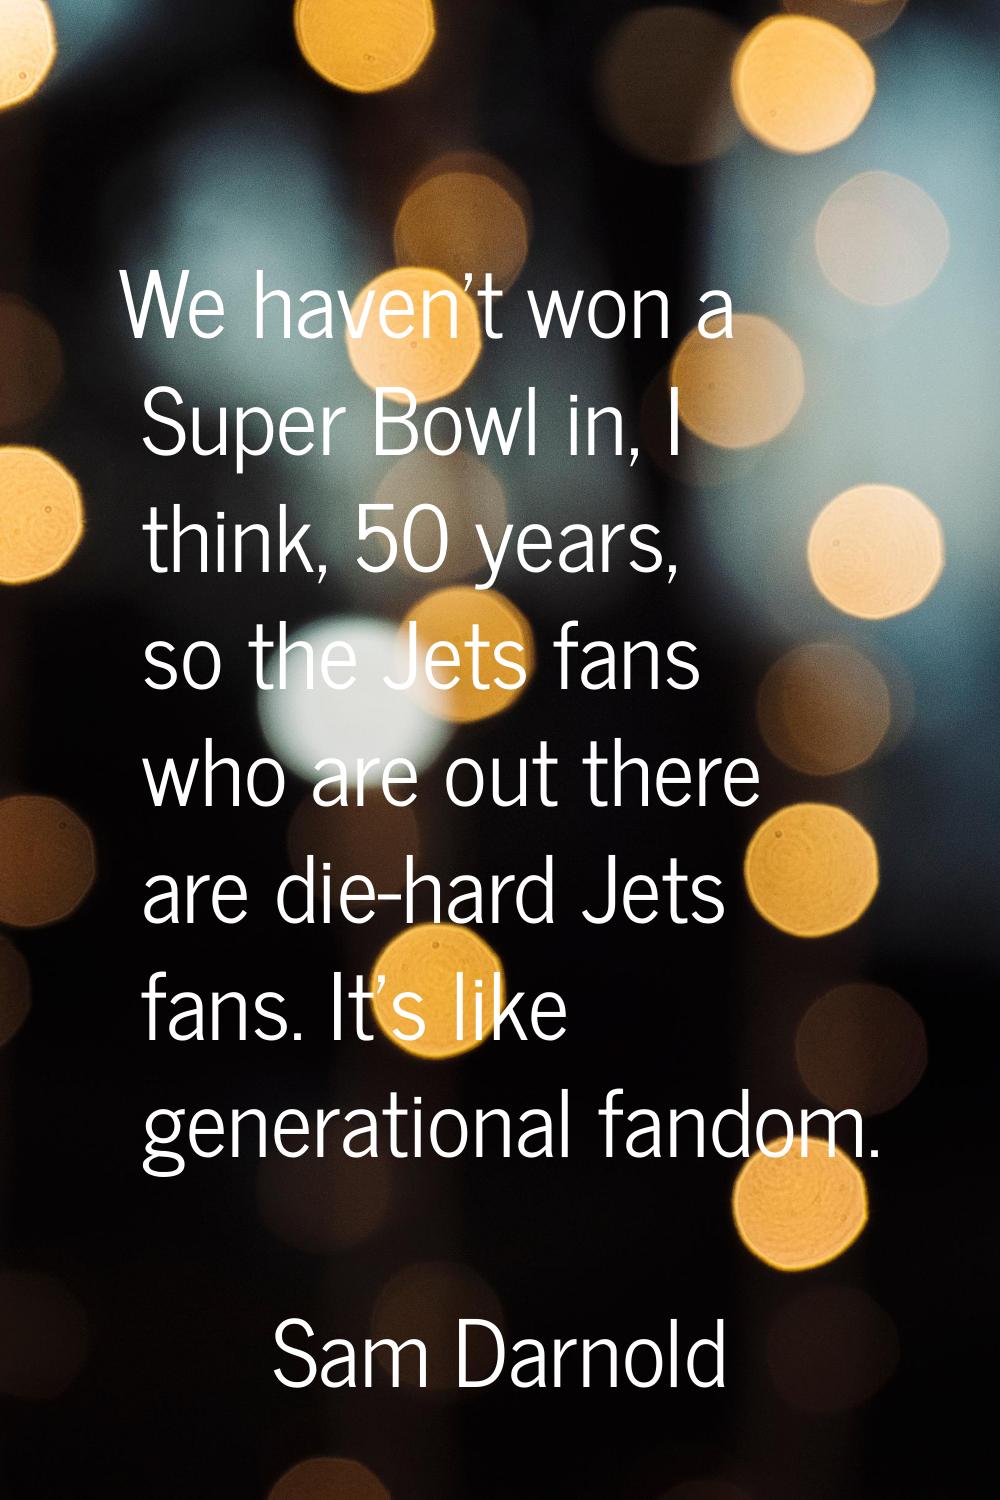 We haven't won a Super Bowl in, I think, 50 years, so the Jets fans who are out there are die-hard 